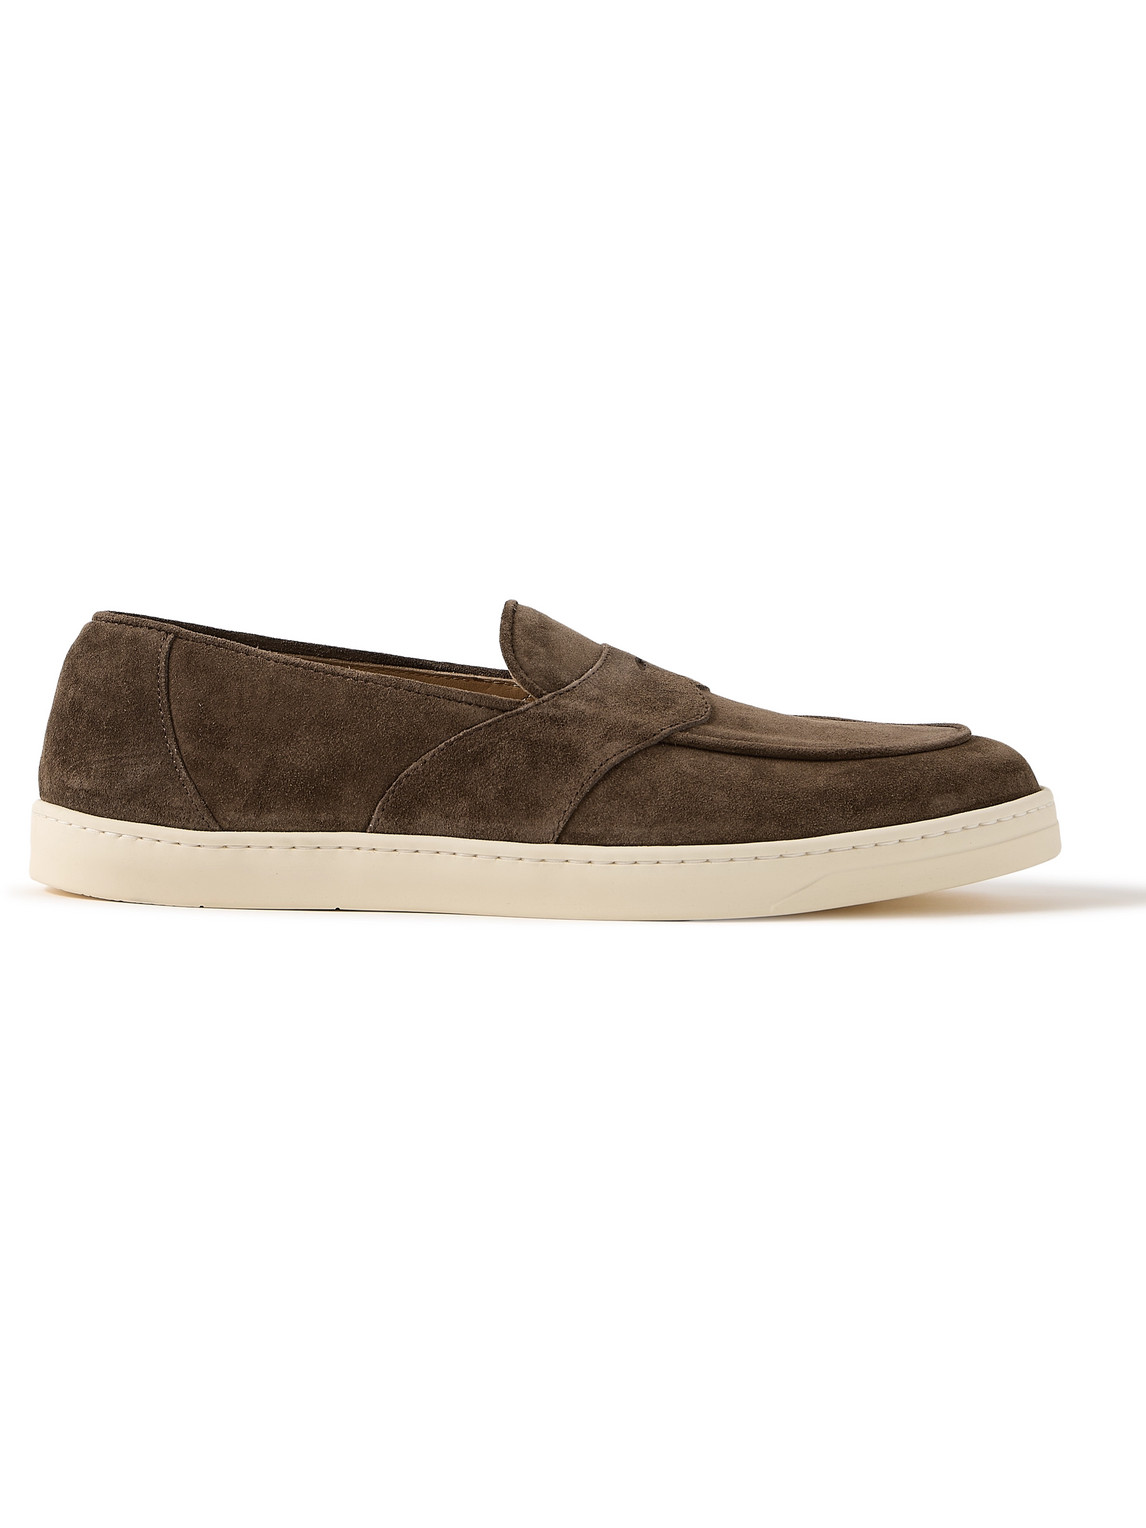 George Cleverley Joey Suede Penny Loafers In Brown